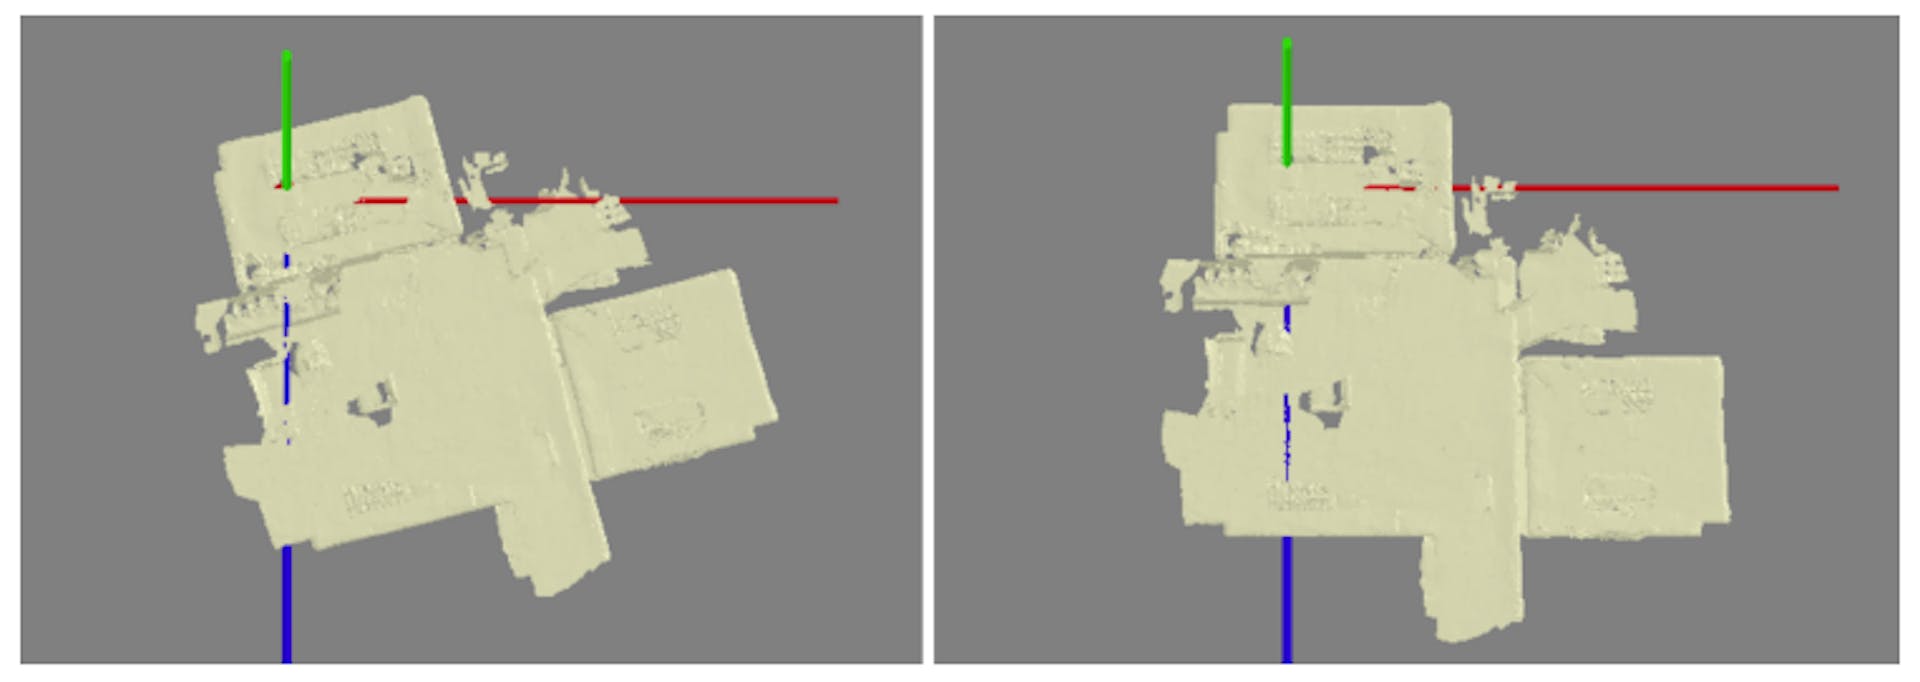 Fig. 4. The mesh model of building B1 (left) that is not aligned initially and the same after wall alignment (right).